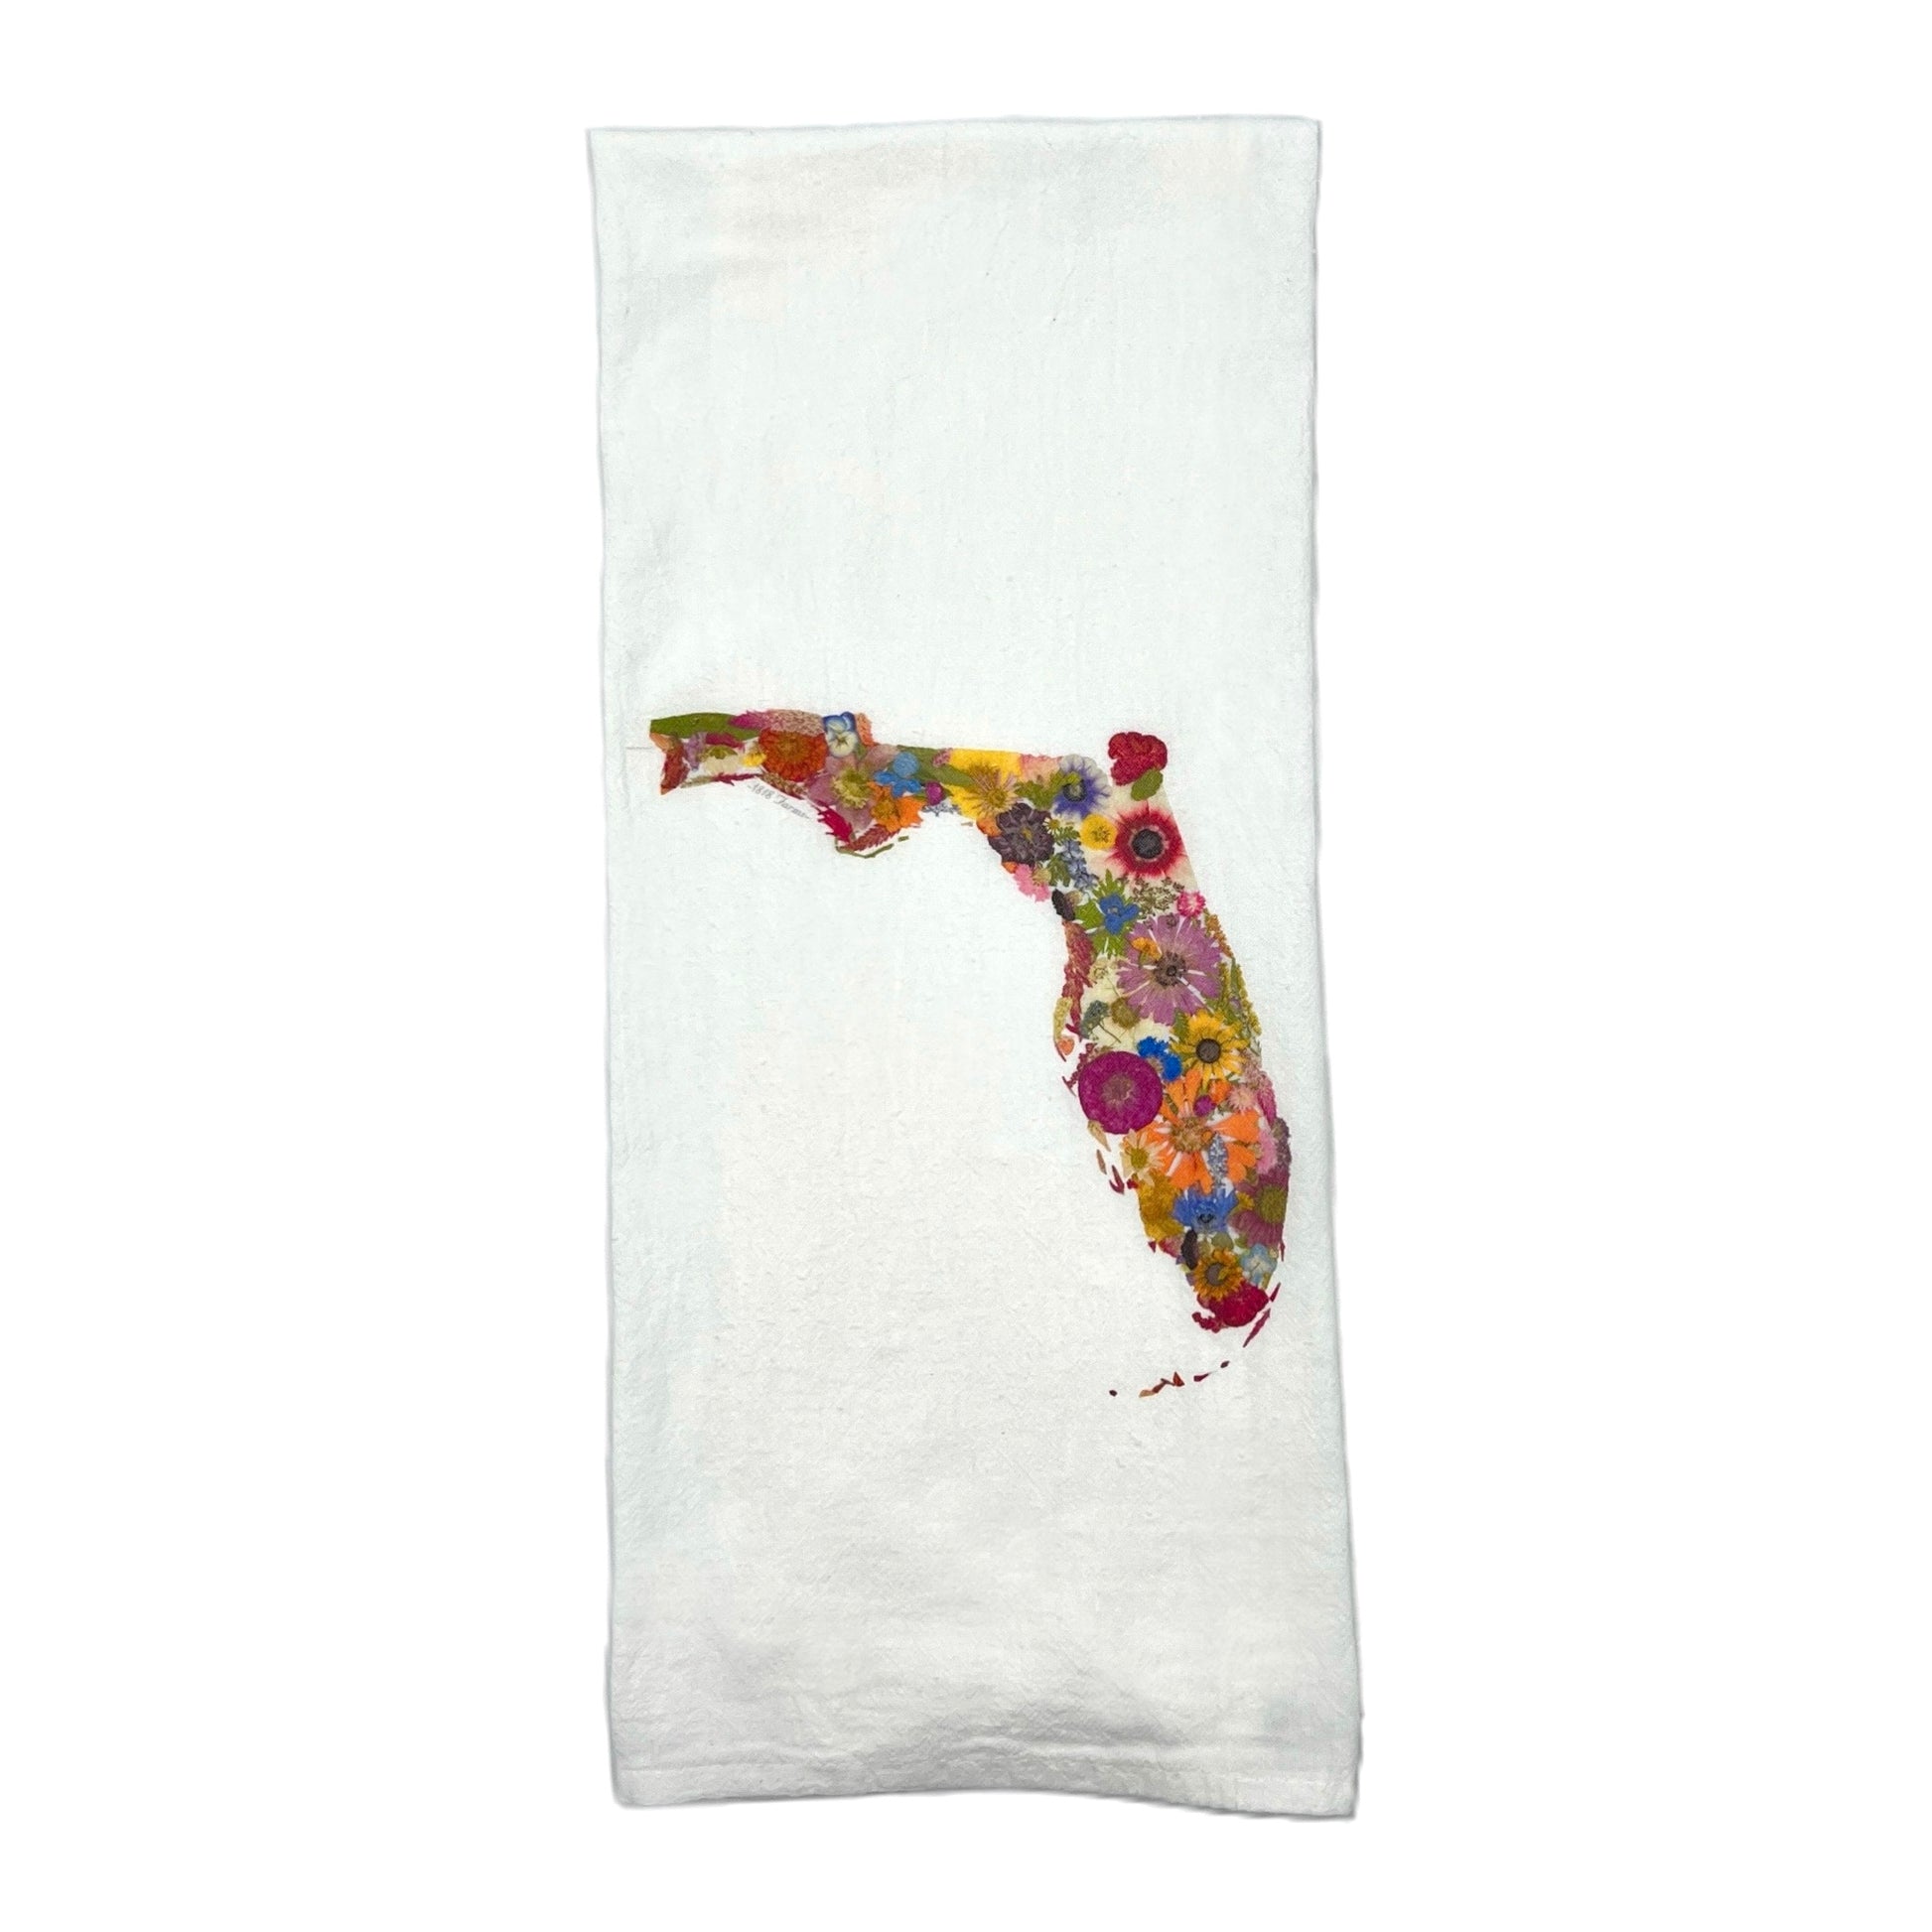 State Themed Flour Sack Towel  - "Where I Bloom" Collection Towel 1818 Farms Florida  